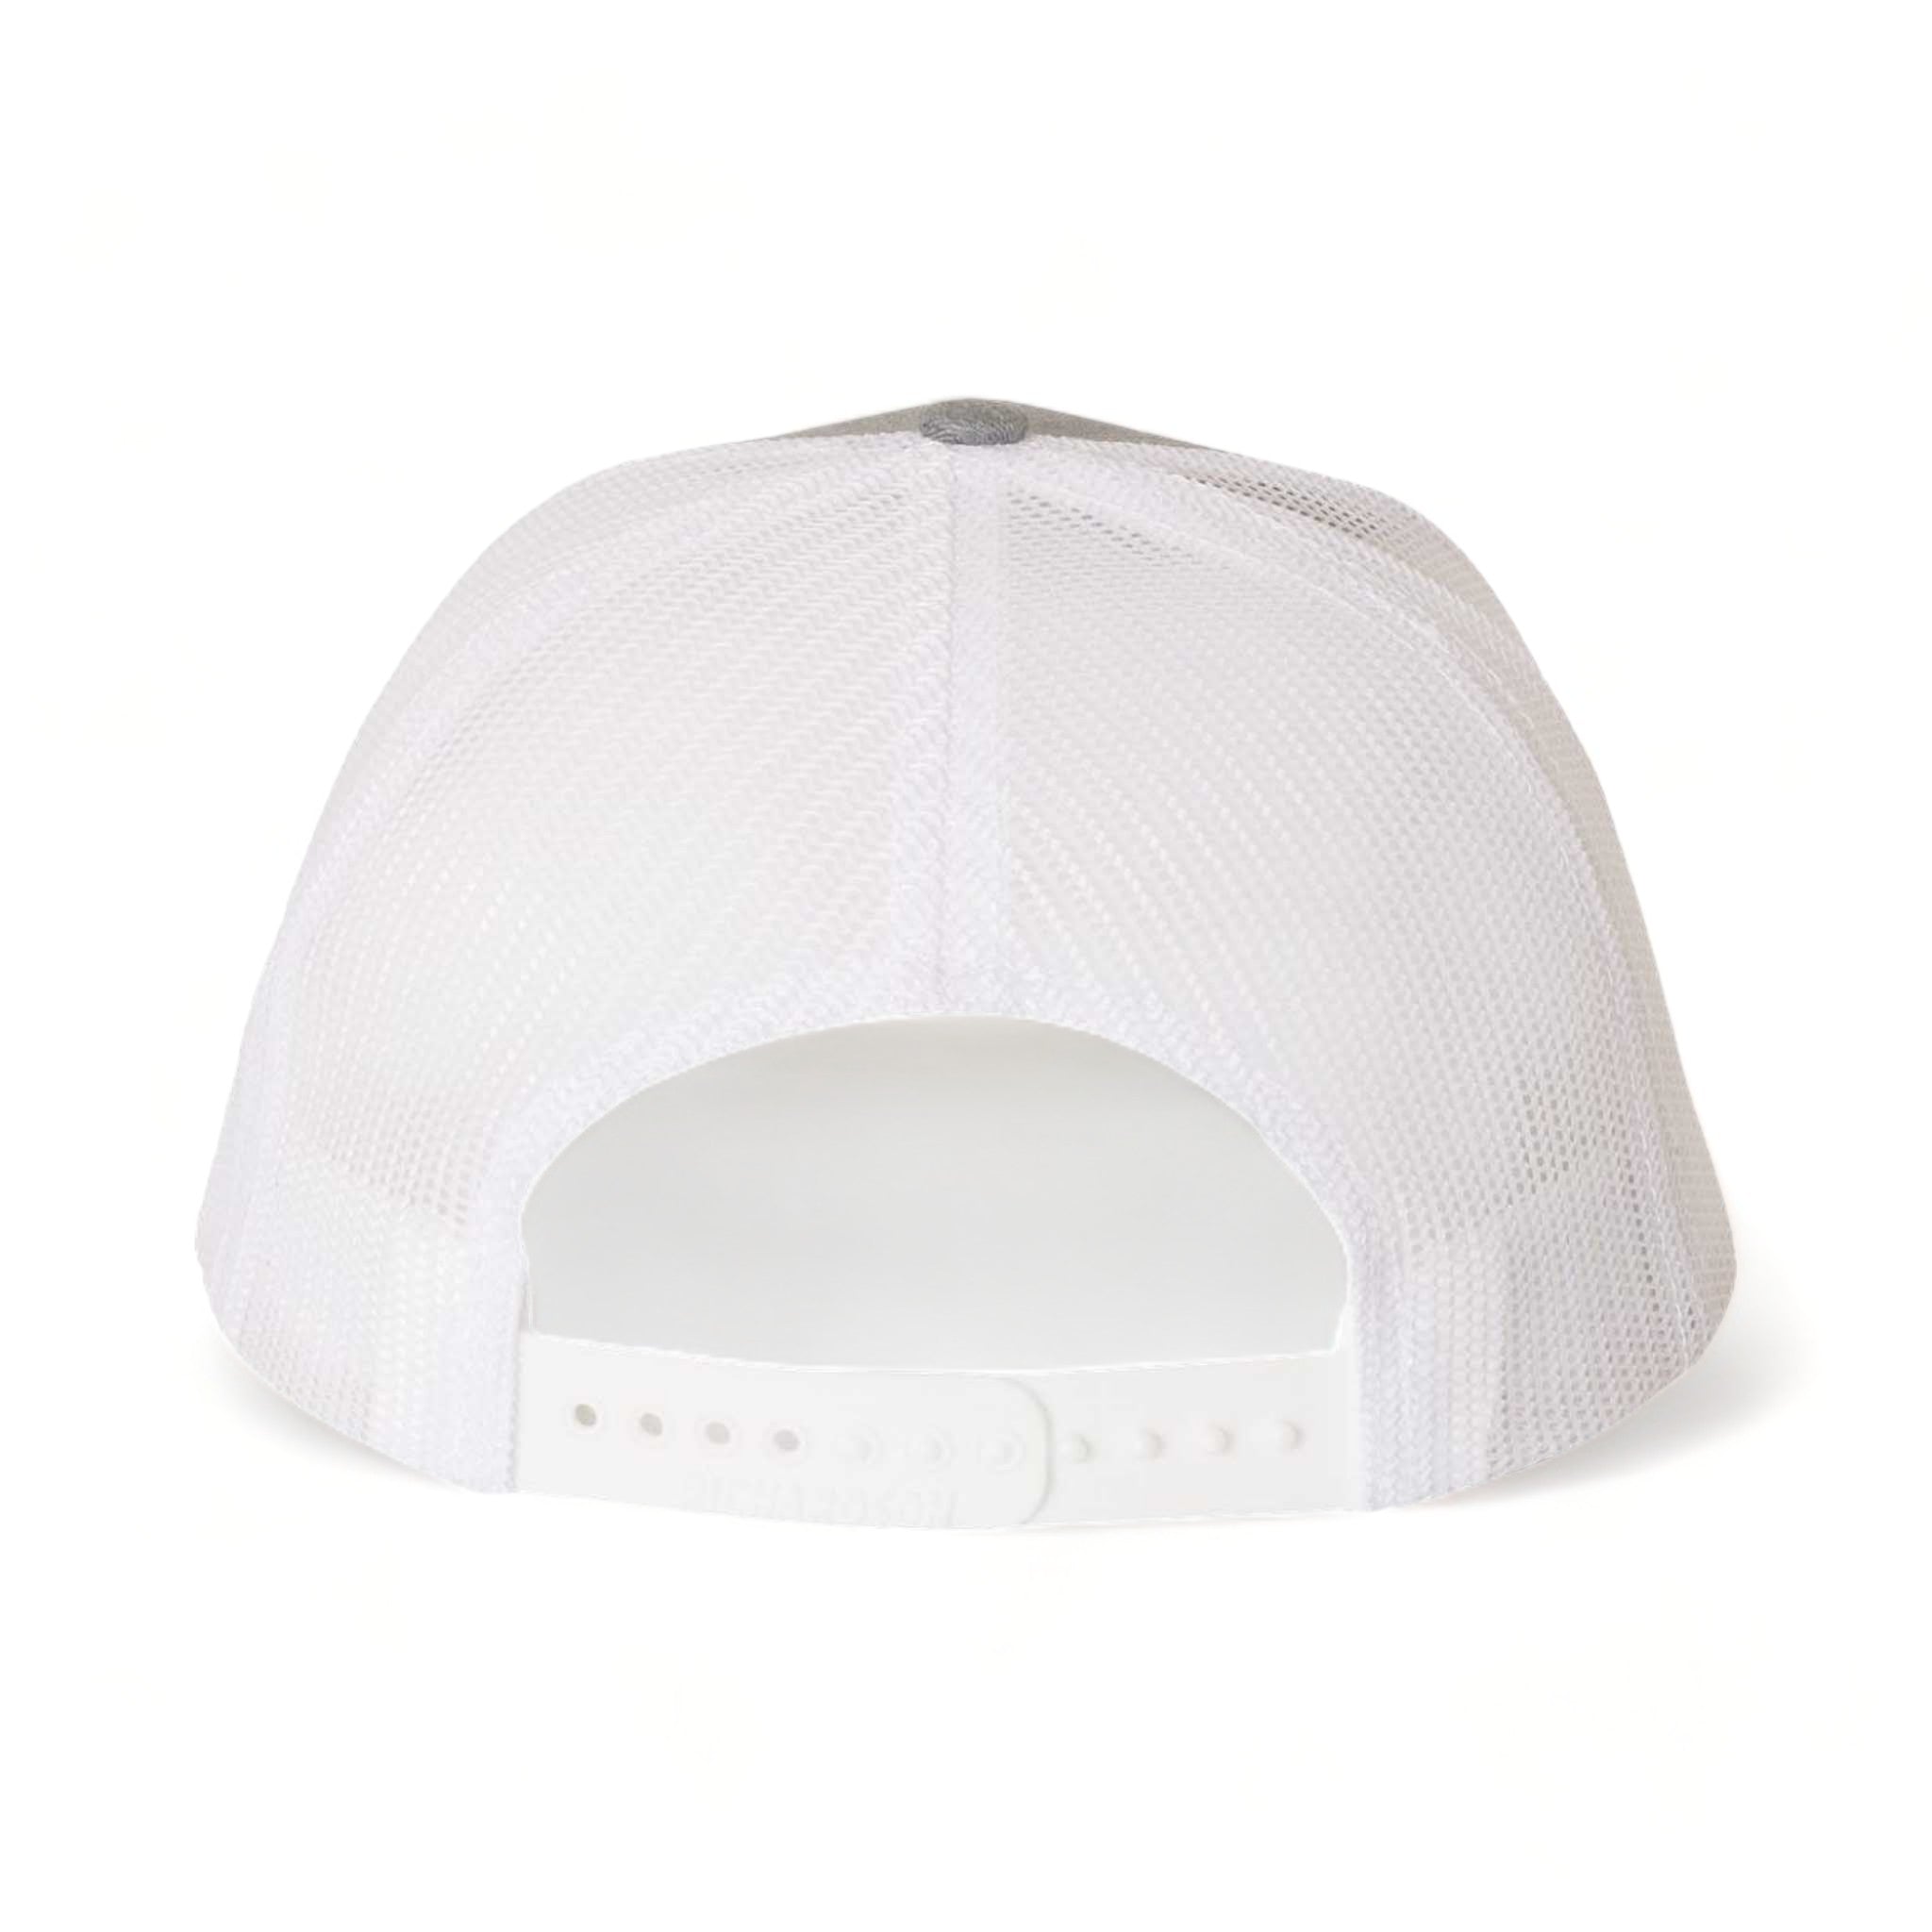 Back view of Richardson 112 custom hat in heather grey and white